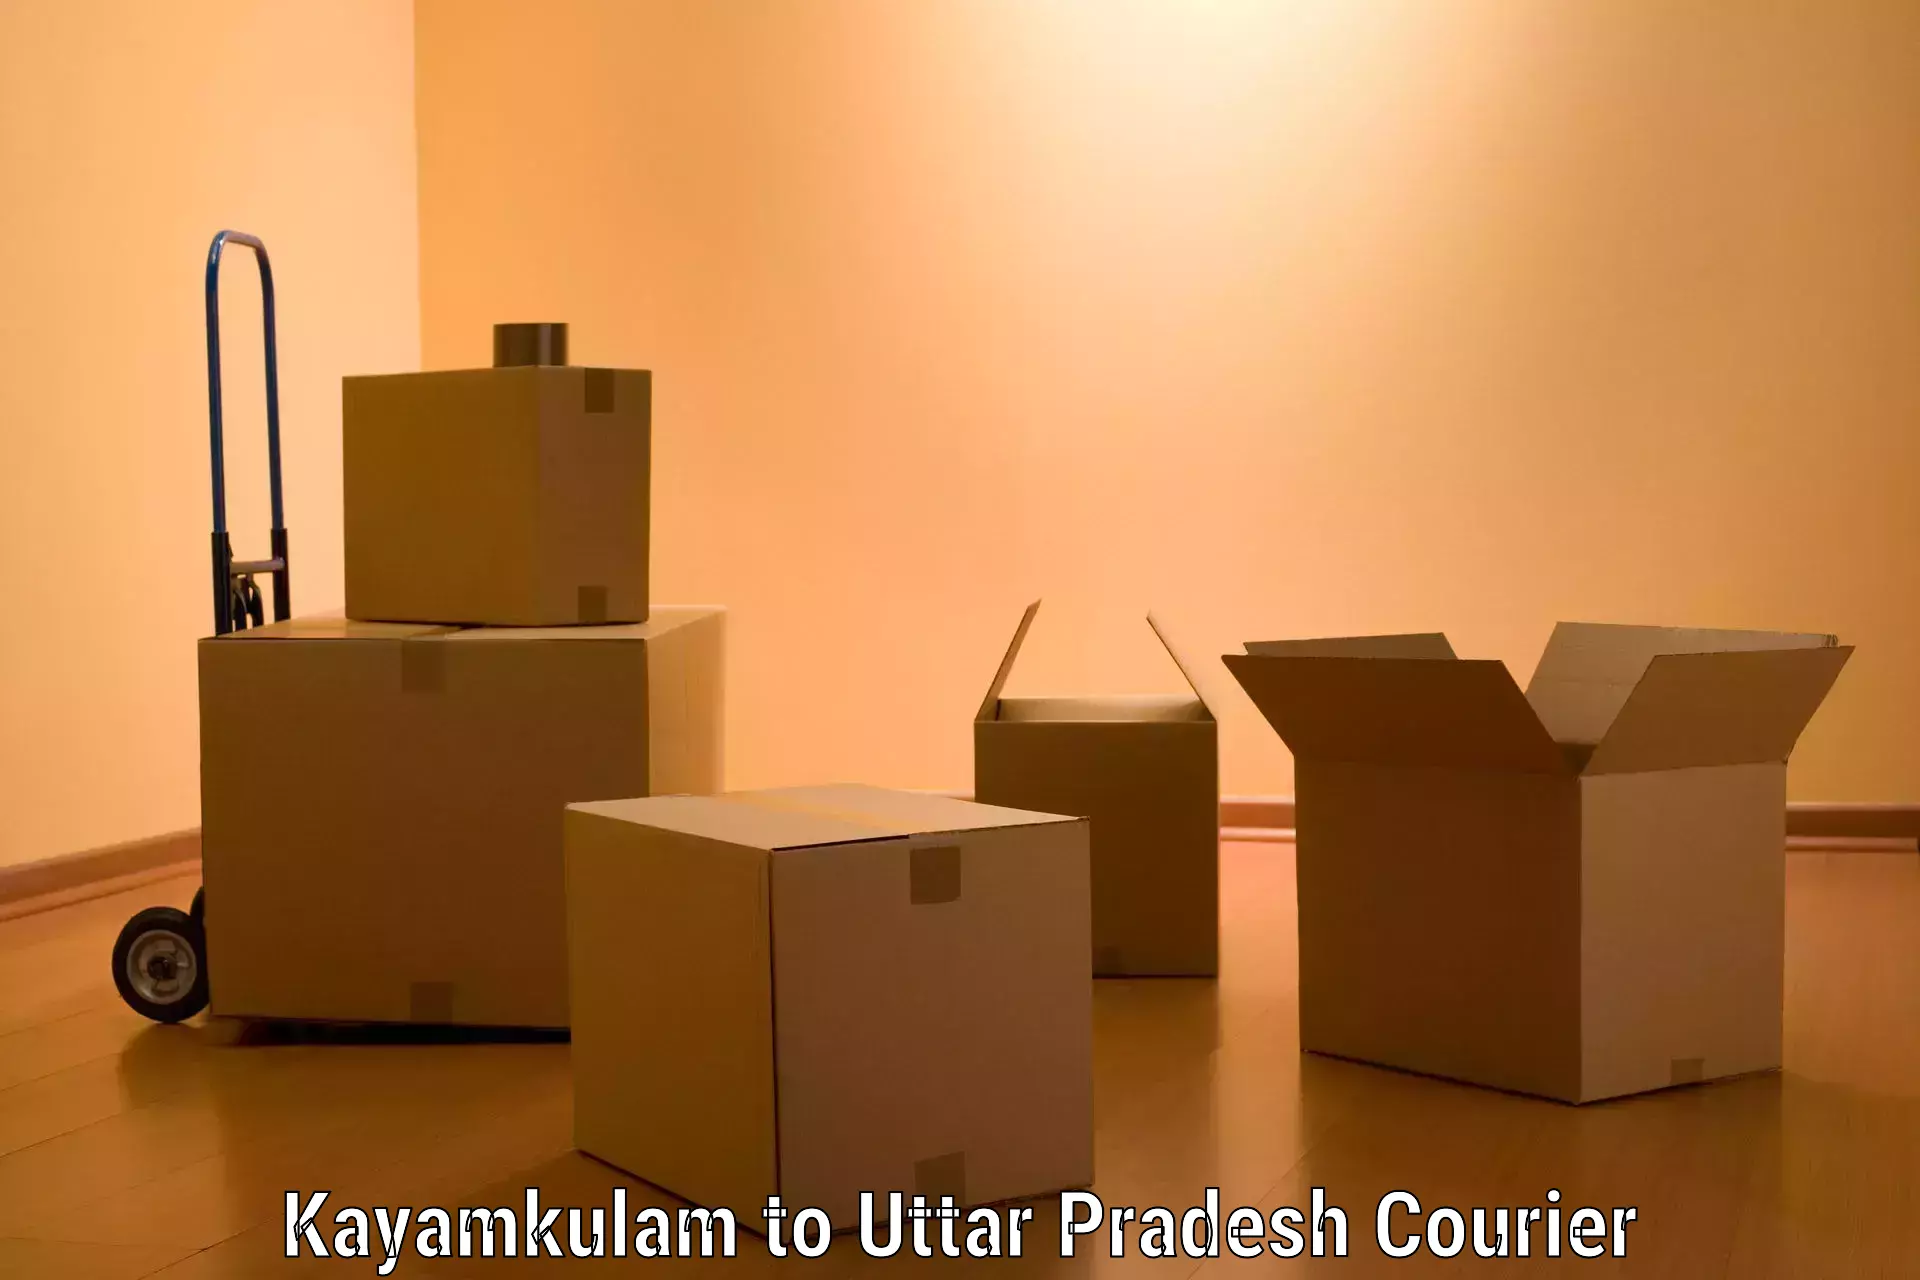 Trusted household movers Kayamkulam to Kanpur